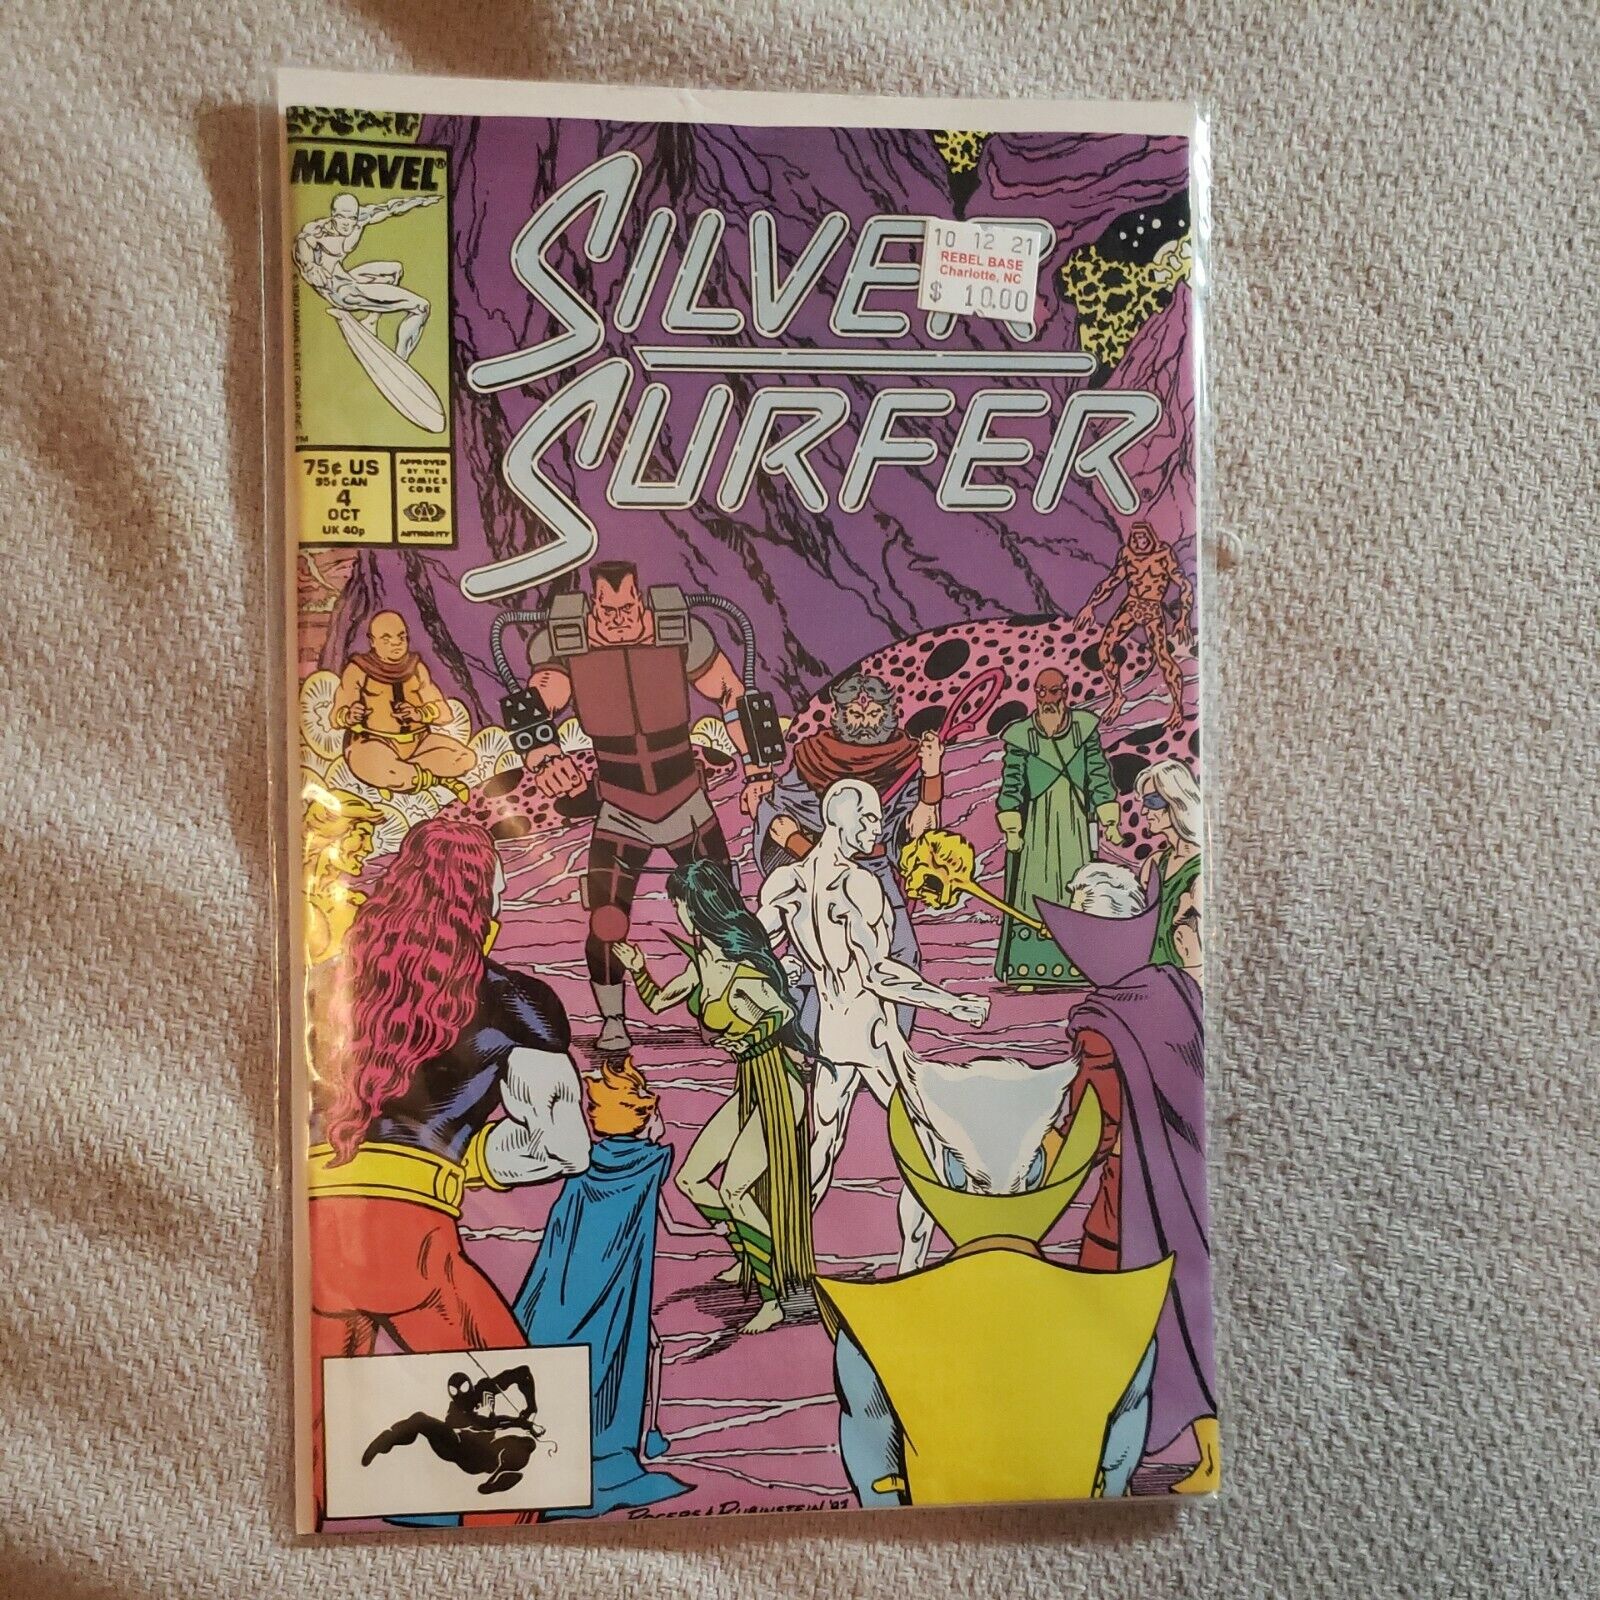 Silver Surfer #4 (Oct 1987, Marvel) the cosmic entities & celestial appearances